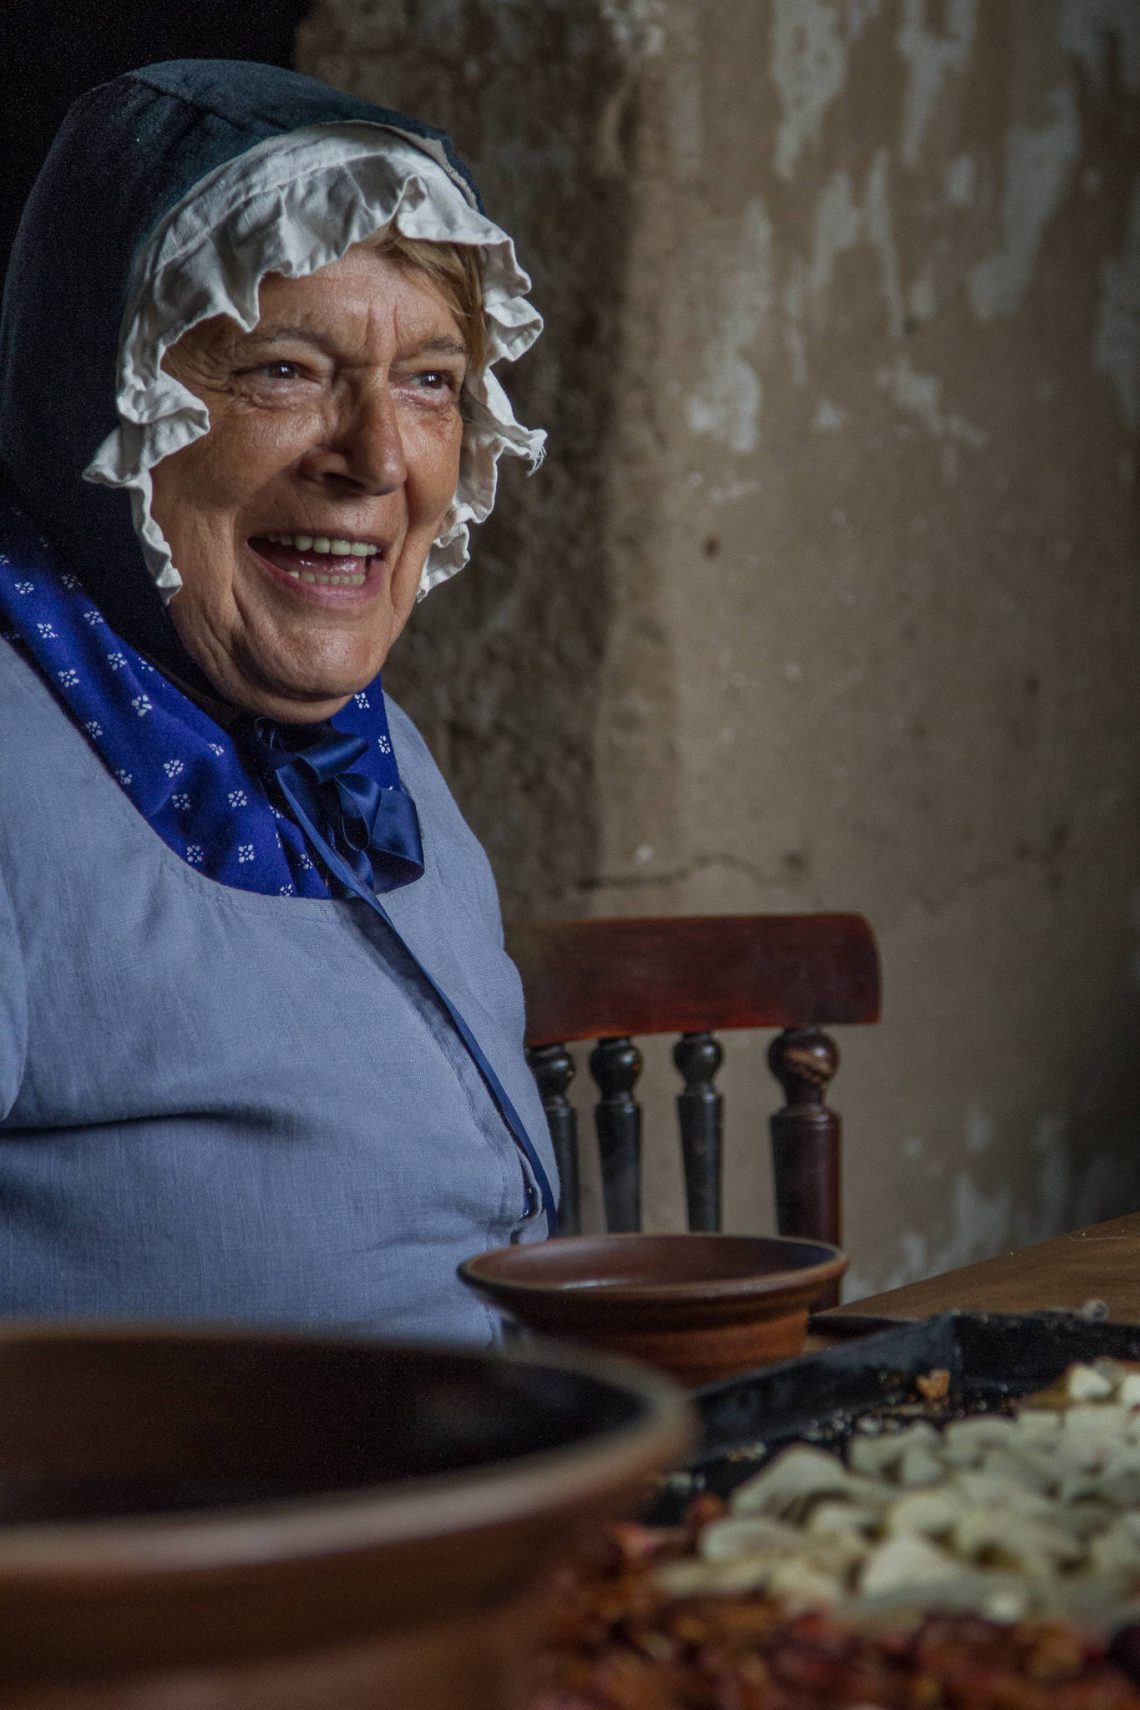 Living History 1813 - The old peasant woman